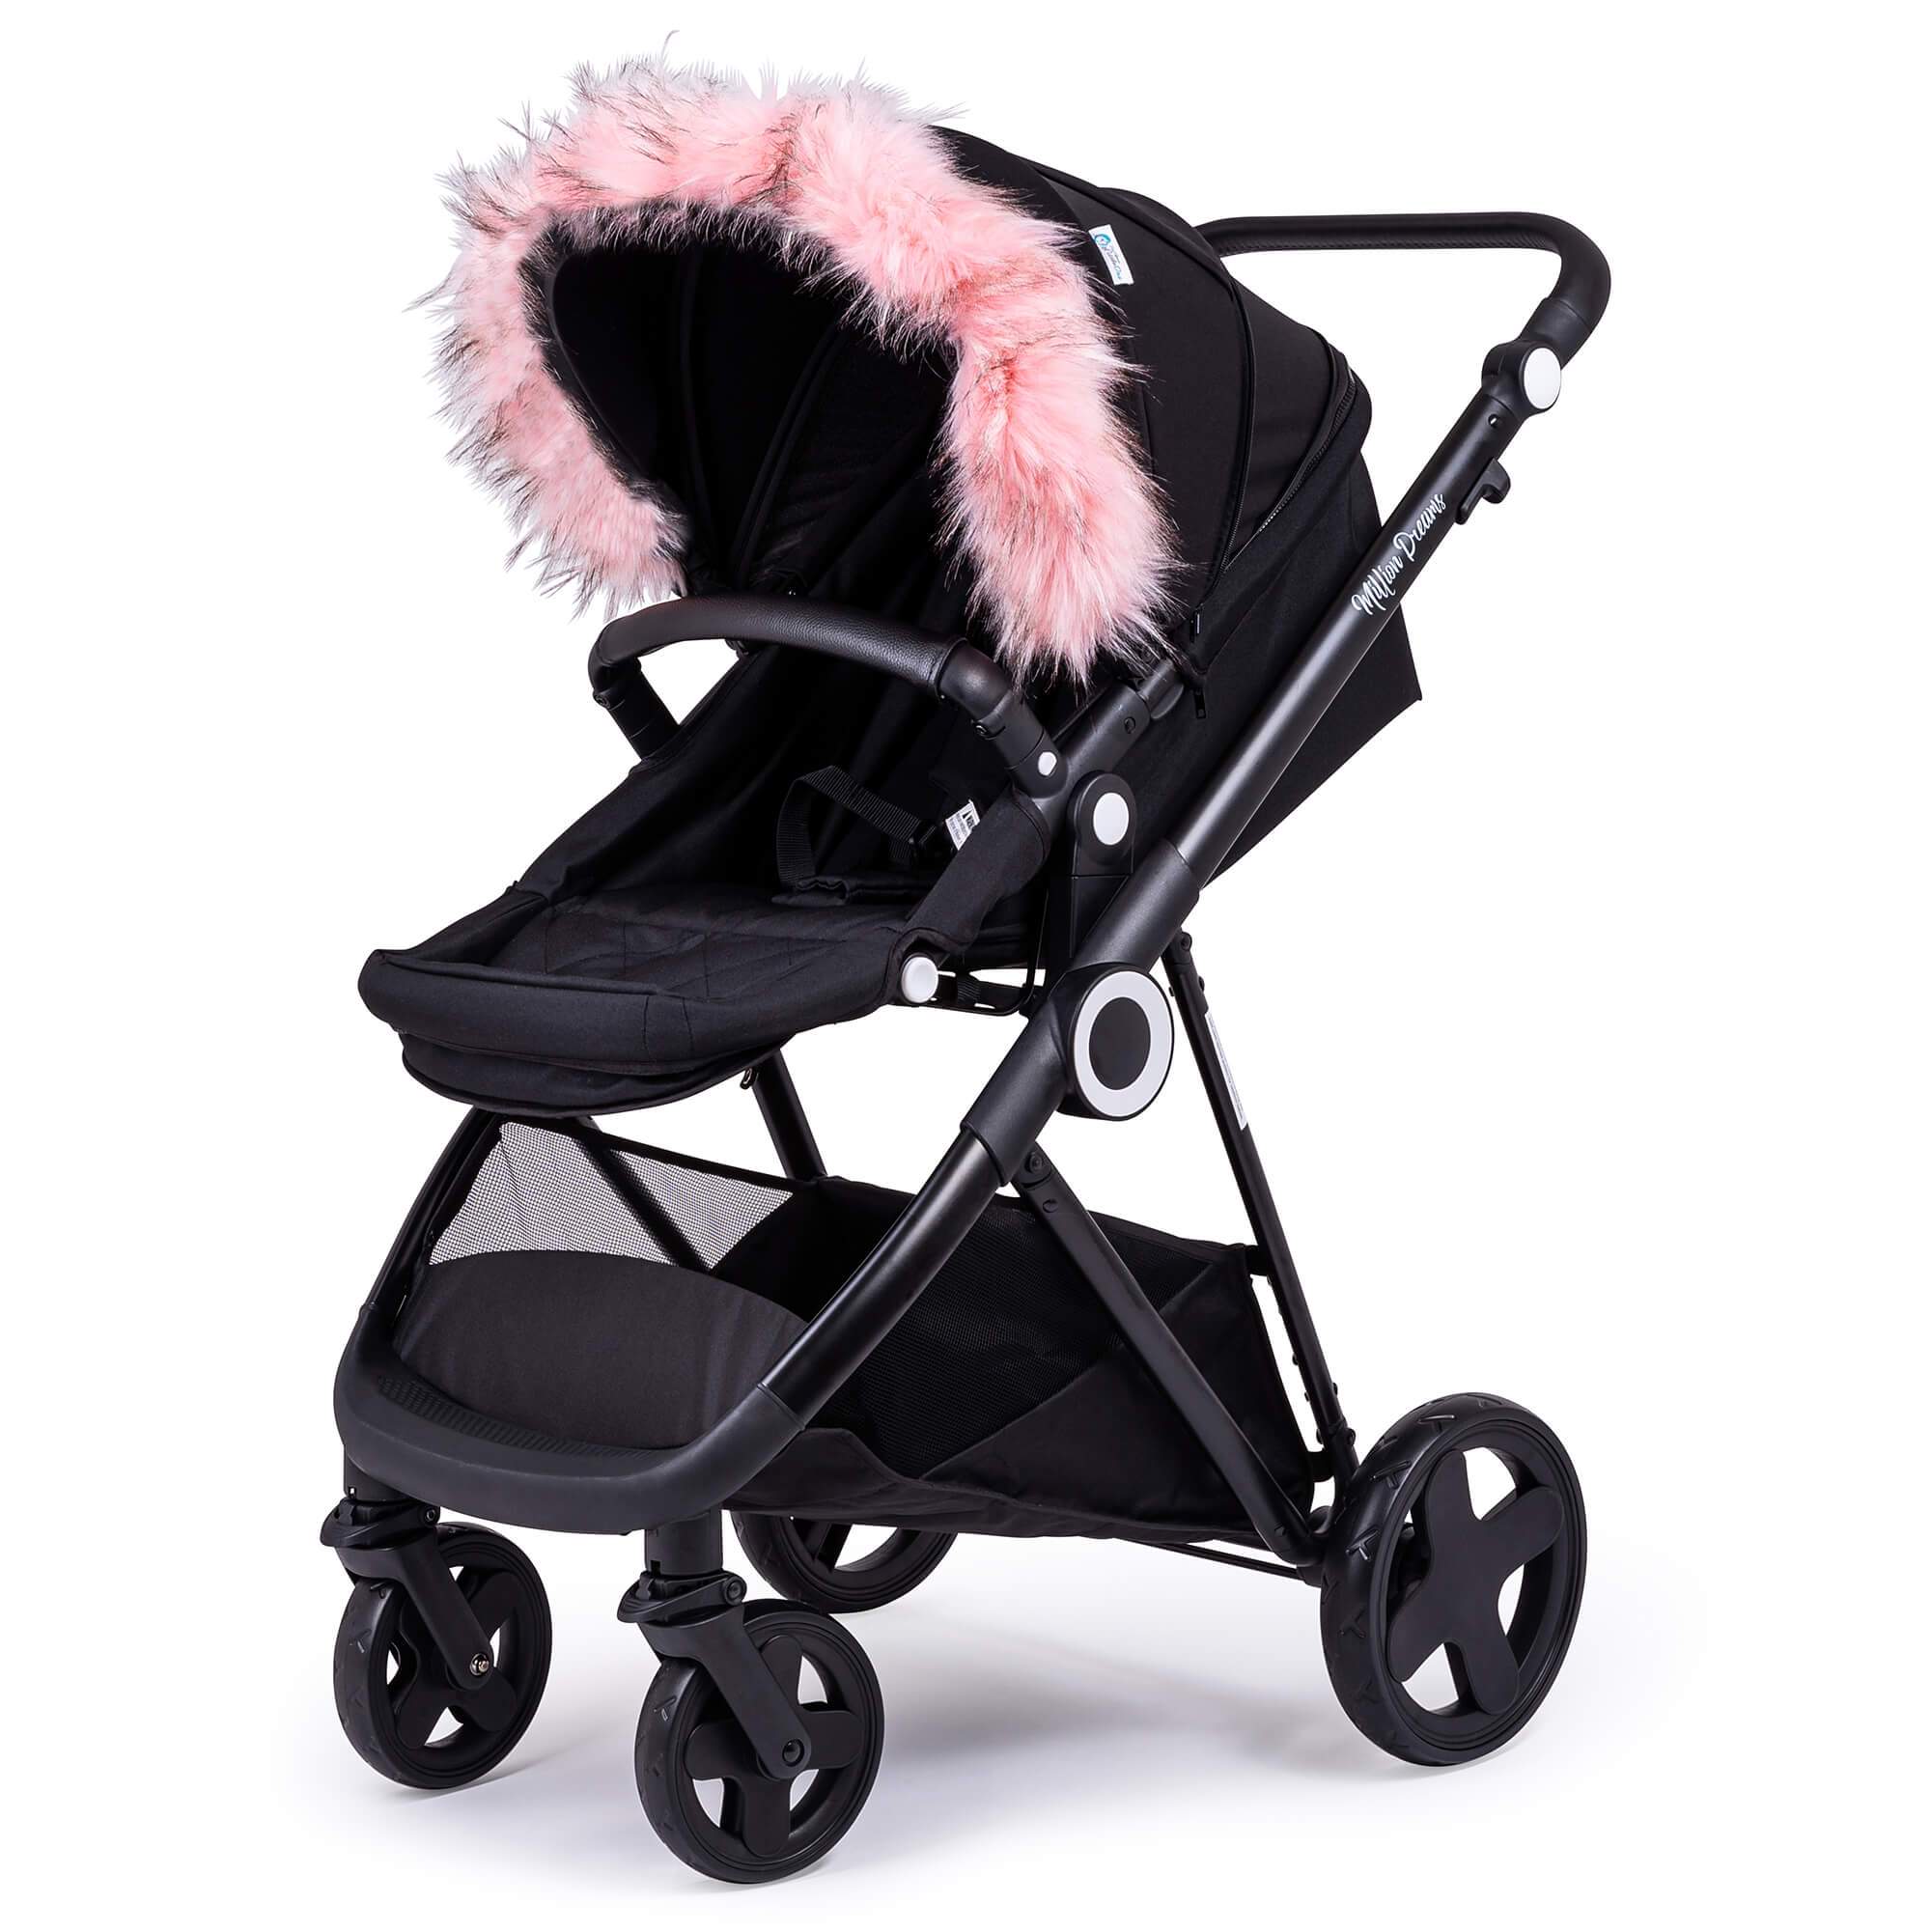 Pram Fur Hood Trim Attachment for Pushchair Compatible with Brevi - For Your Little One